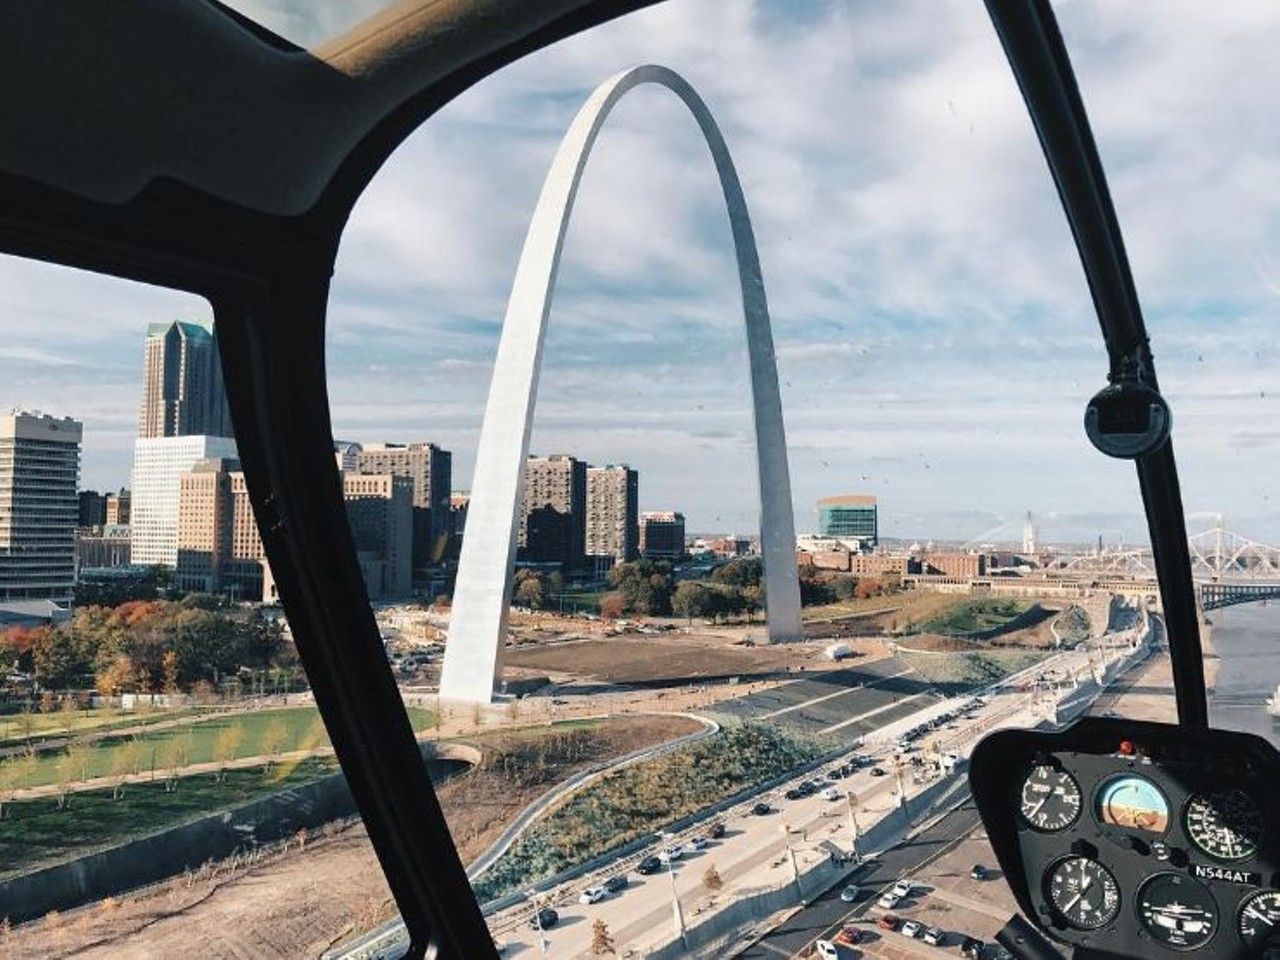 Gateway Helicopter Tours
50 N. Leonor K Sullivan Blvd. 
St. Louis, MO 63102
(314) 496-4494
If you&#146;re looking for an all-new way to experience St. Louis, do it from the air. Gateway Helicopter Tours opens each spring and offers four different tours. Photo courtesy of Instagram / dbremerkamp.